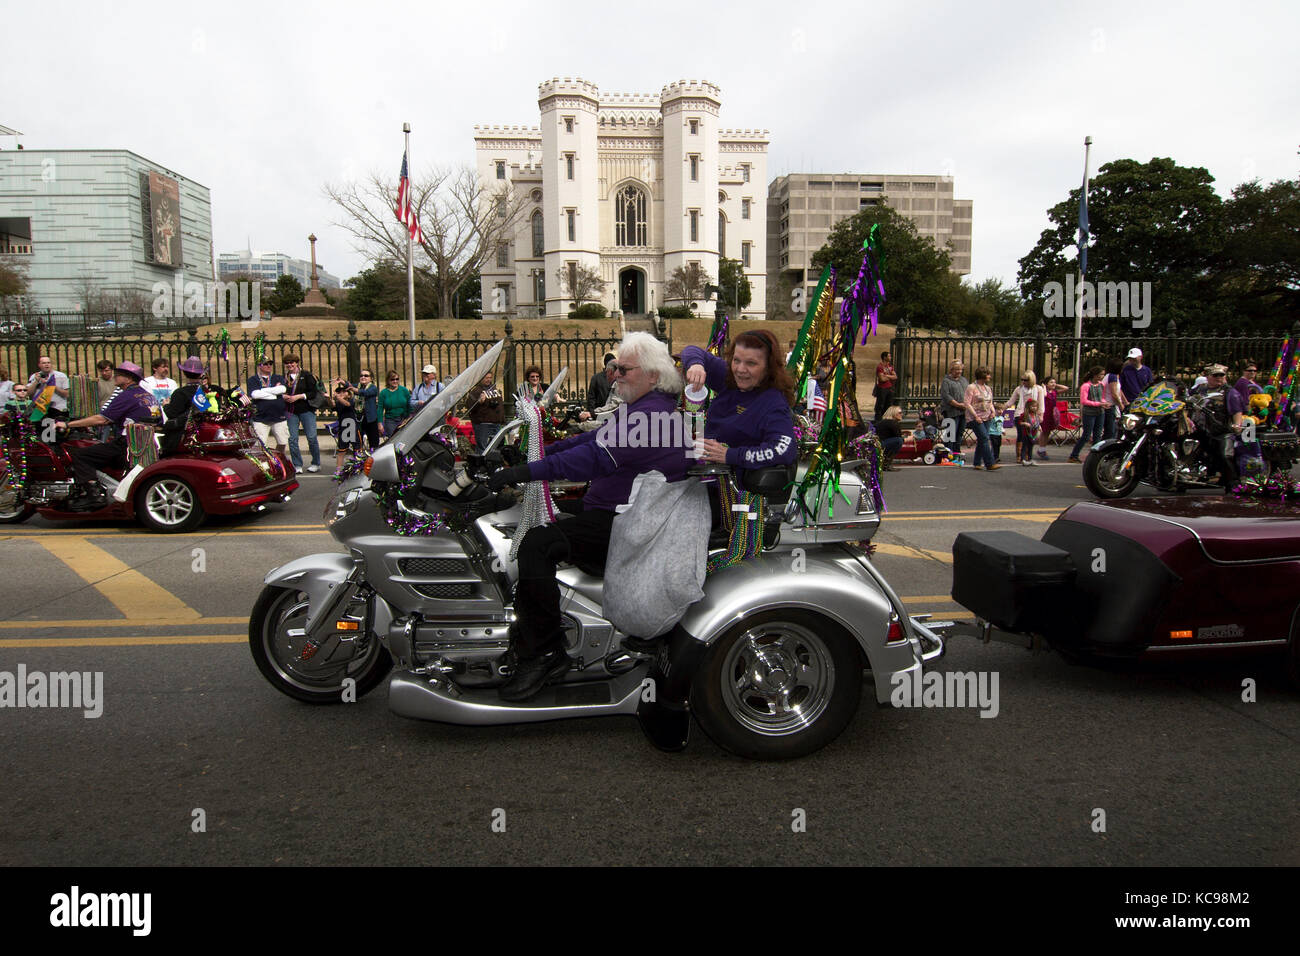 Baton Rouge, Louisiana, USA - 2016: A parade in front of the old Sate Capitol building during Mardi Gras celebrations. Stock Photo